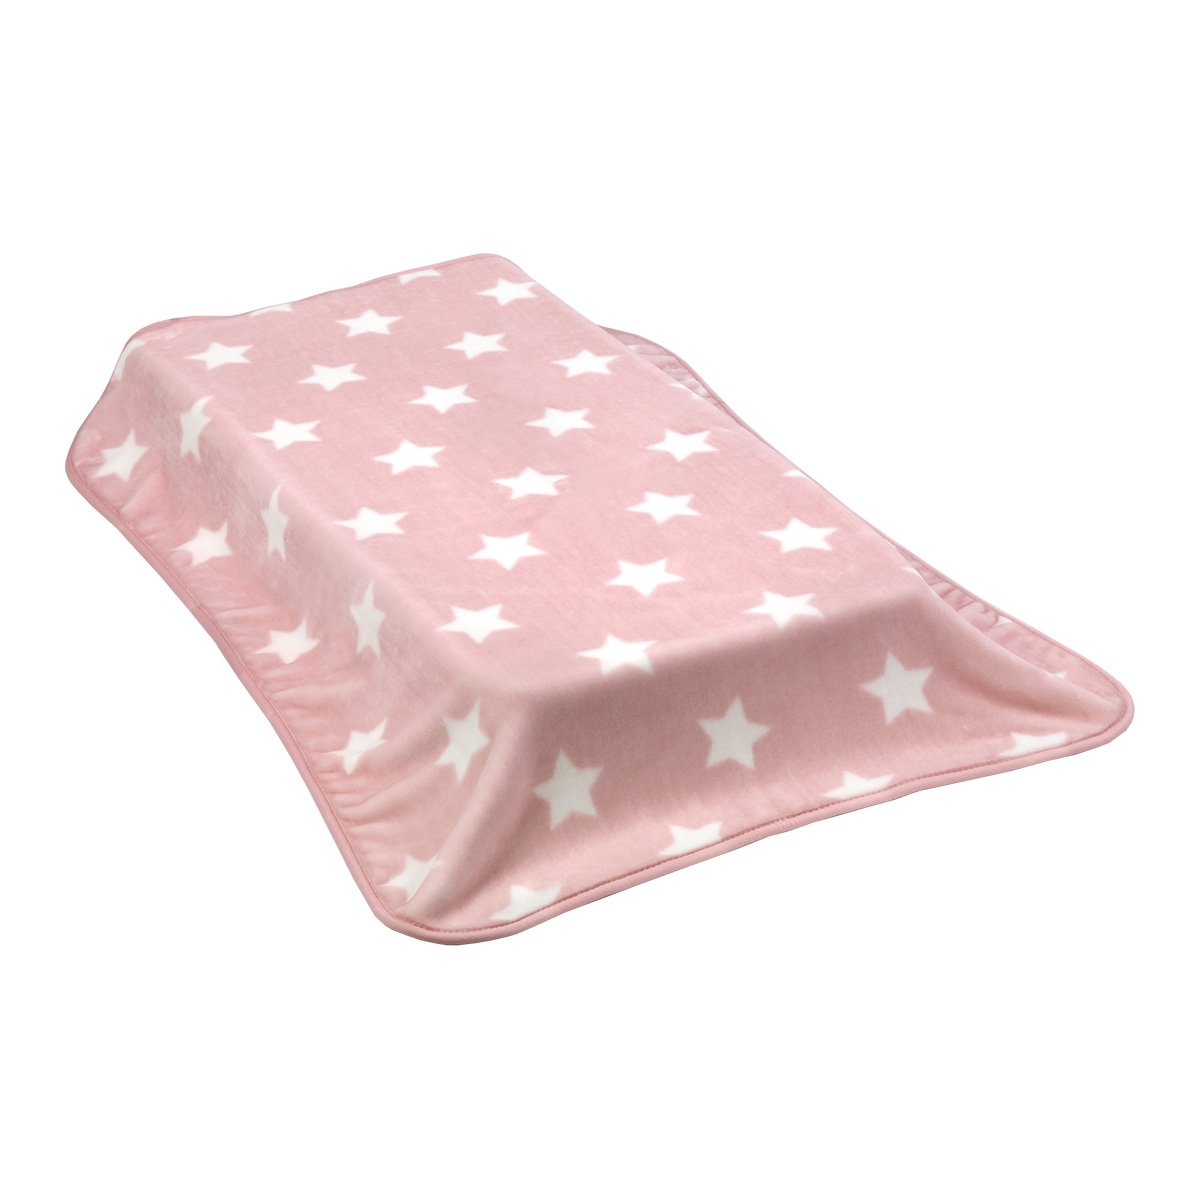 Cambrass 39103 Day, Star Blanket Bed 110 x 140 cm Pink